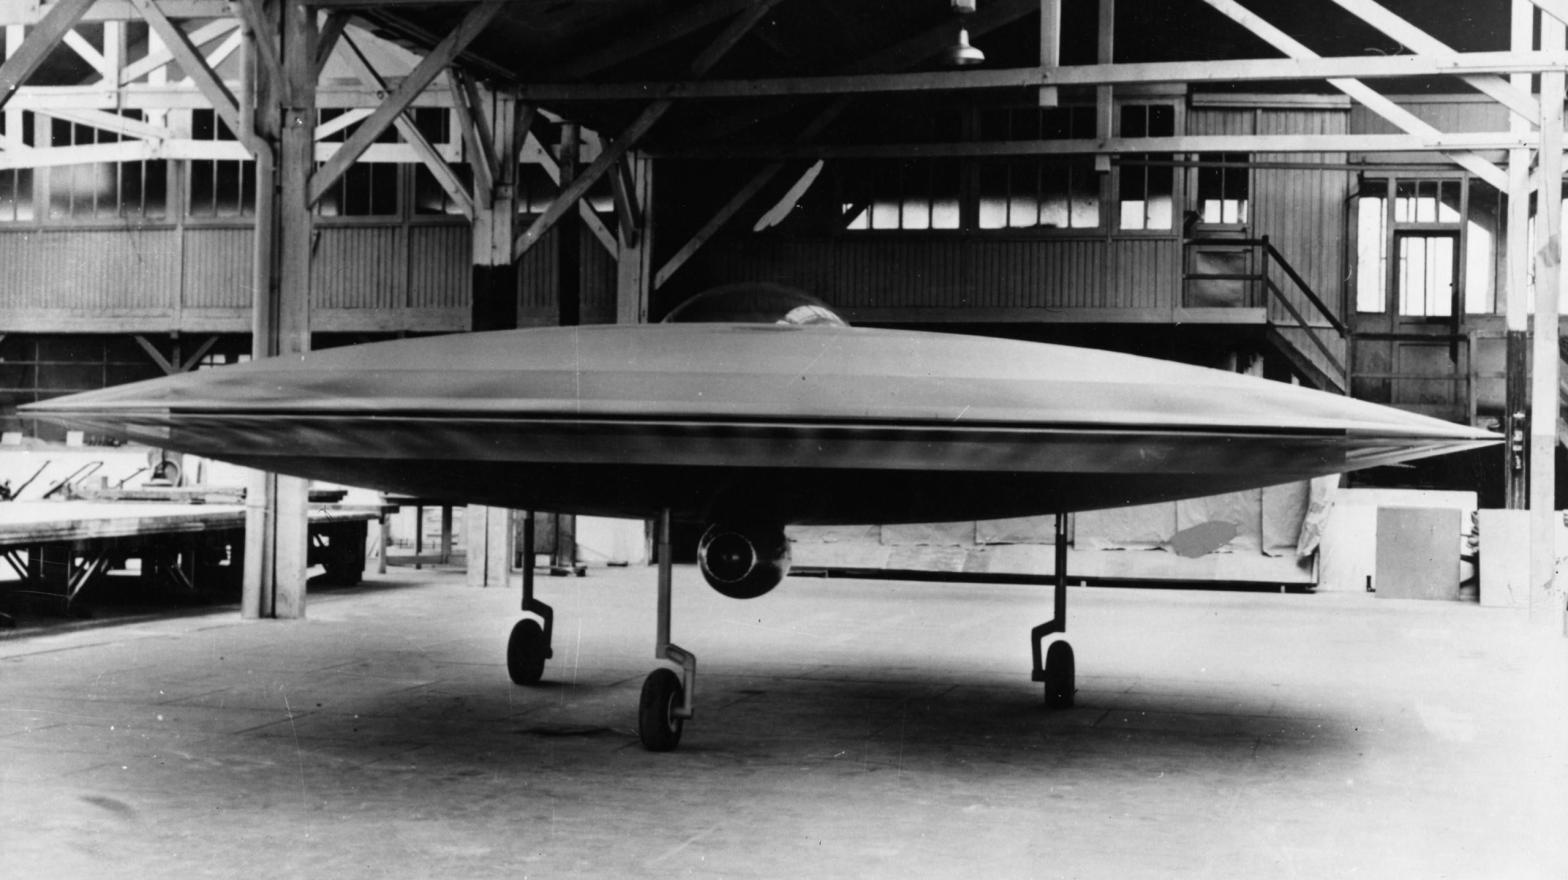 A 3/5 scale model of a proposed VTOL 'flying saucer' aircraft, the Couzinet Aerodyne RC-360, on display at a workshop on the Ile de la Jatte in Levallois-Perret, Paris, 1955. (Photo: Keystone/Hulton Archive/Getty Images, Getty Images)